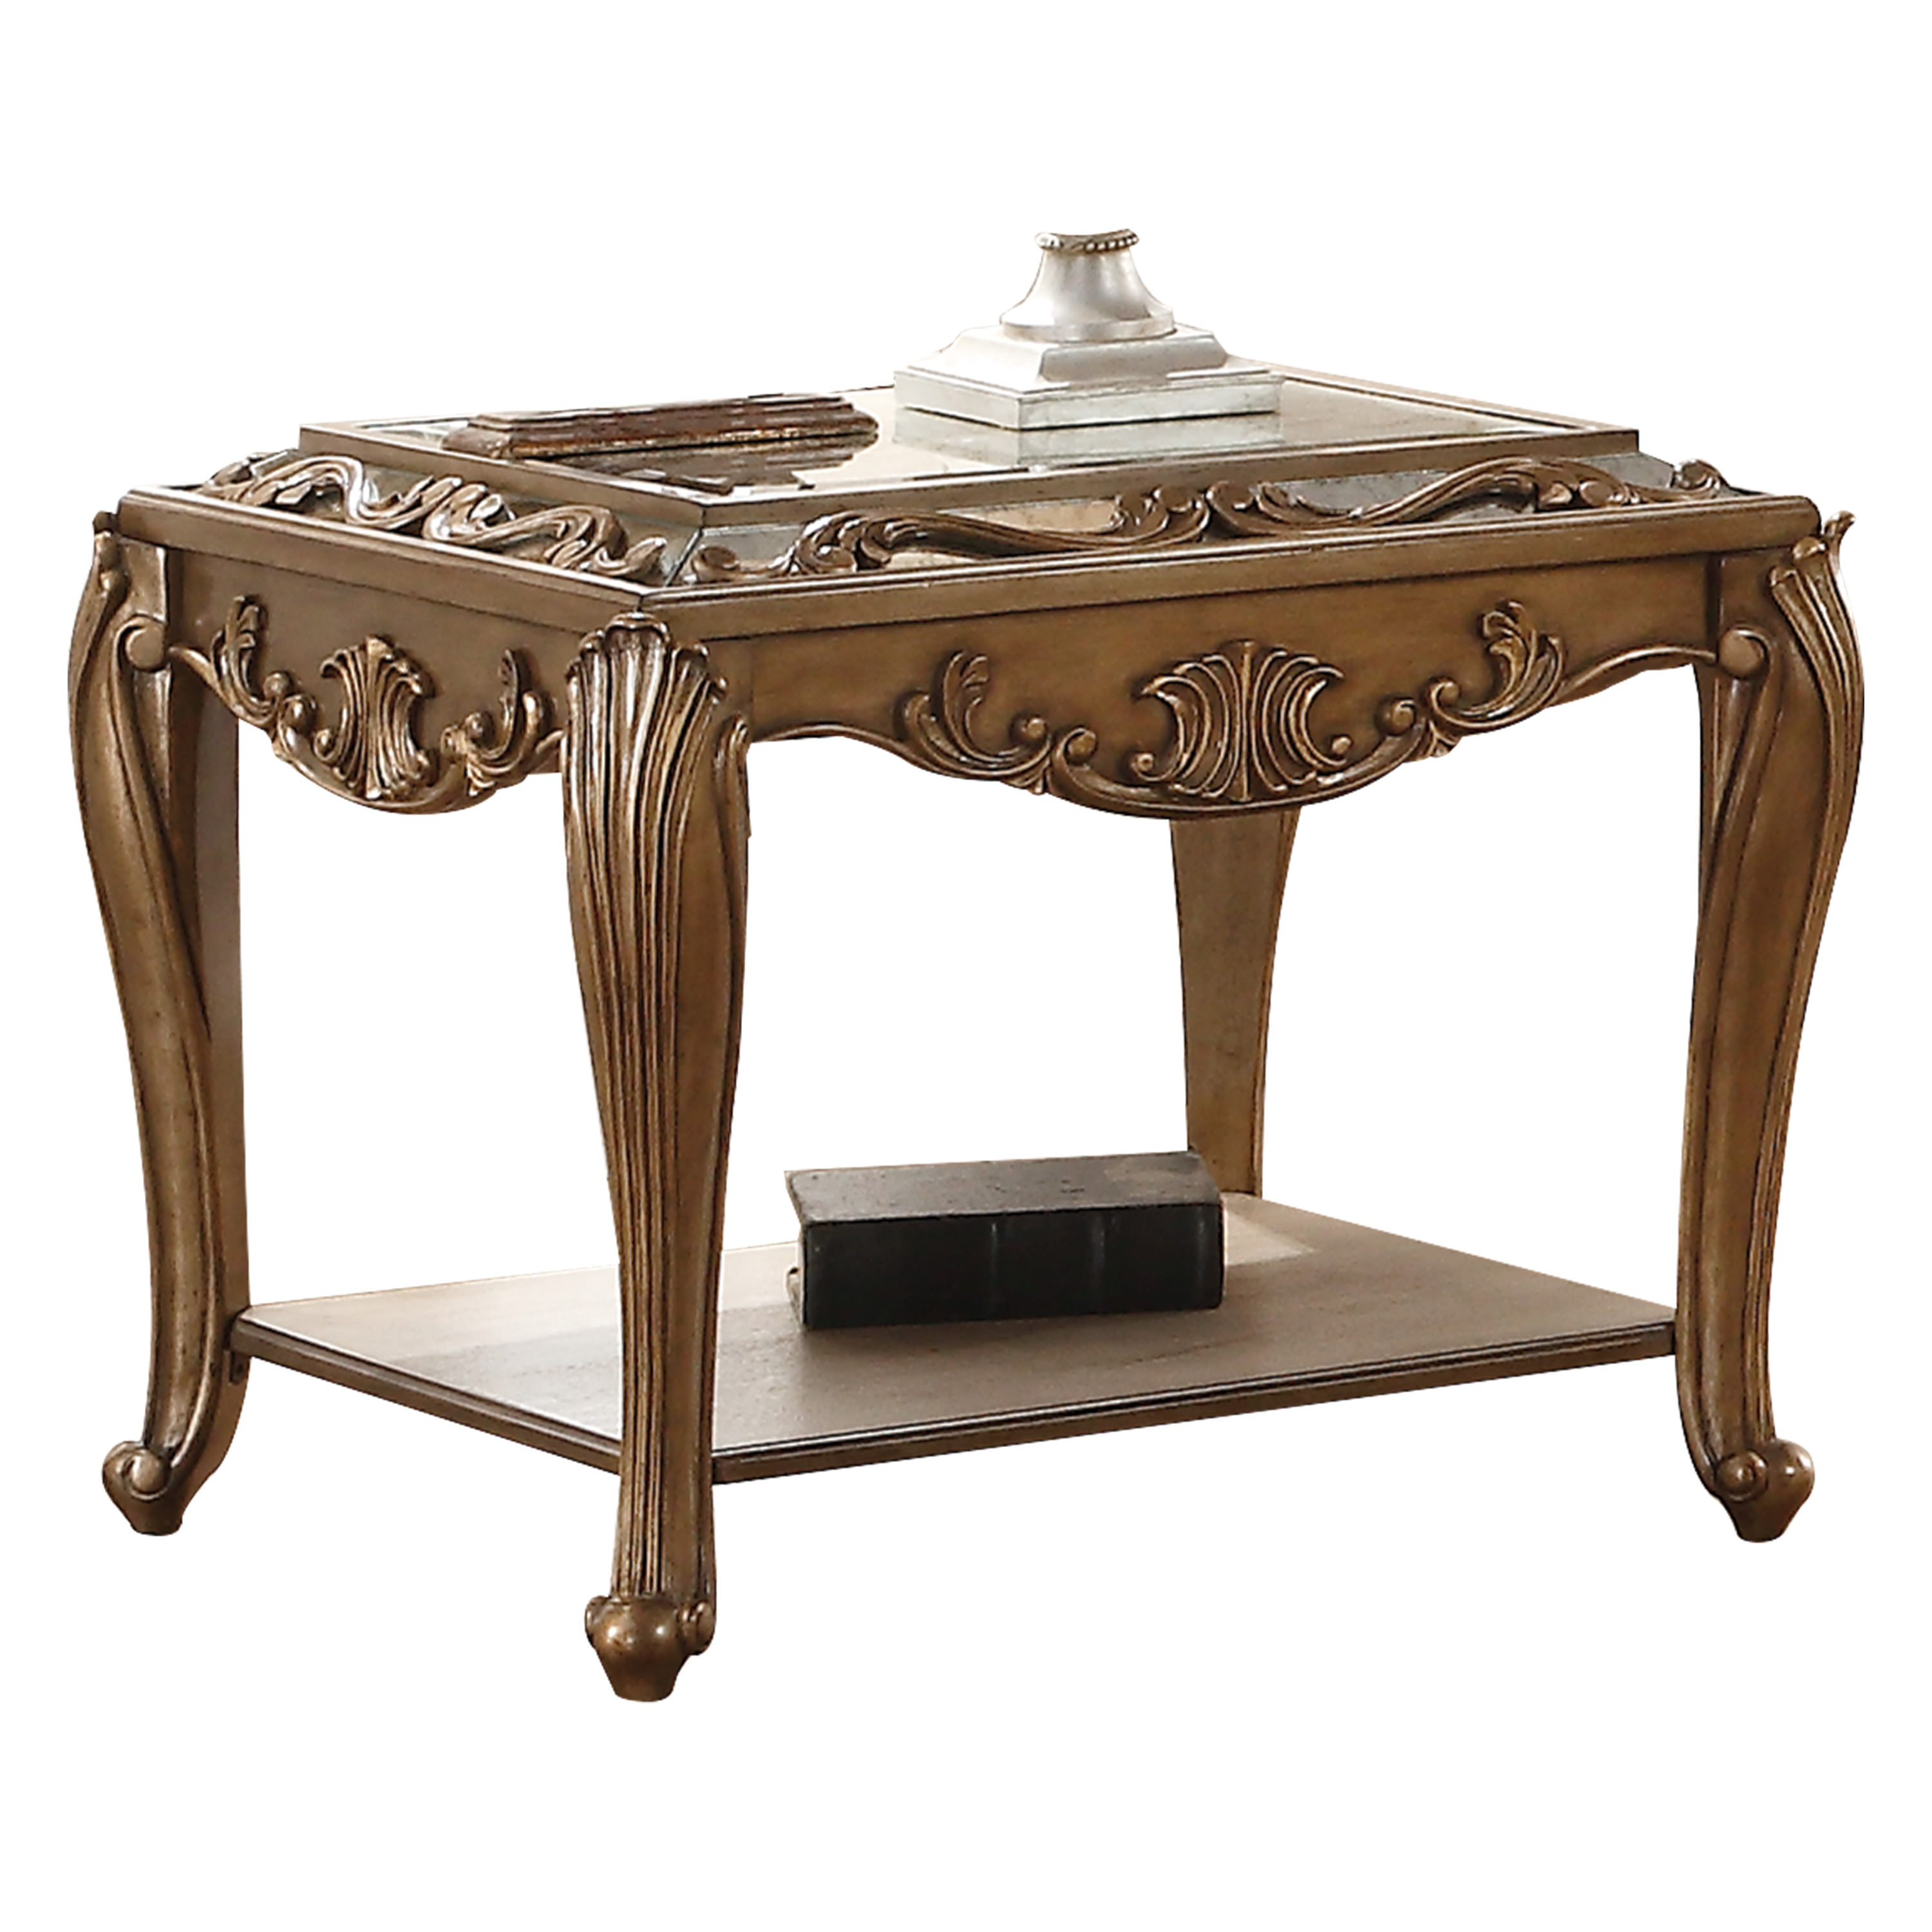 ACME Orianne End Table in Mirrored and Antique Gold - image 1 of 4